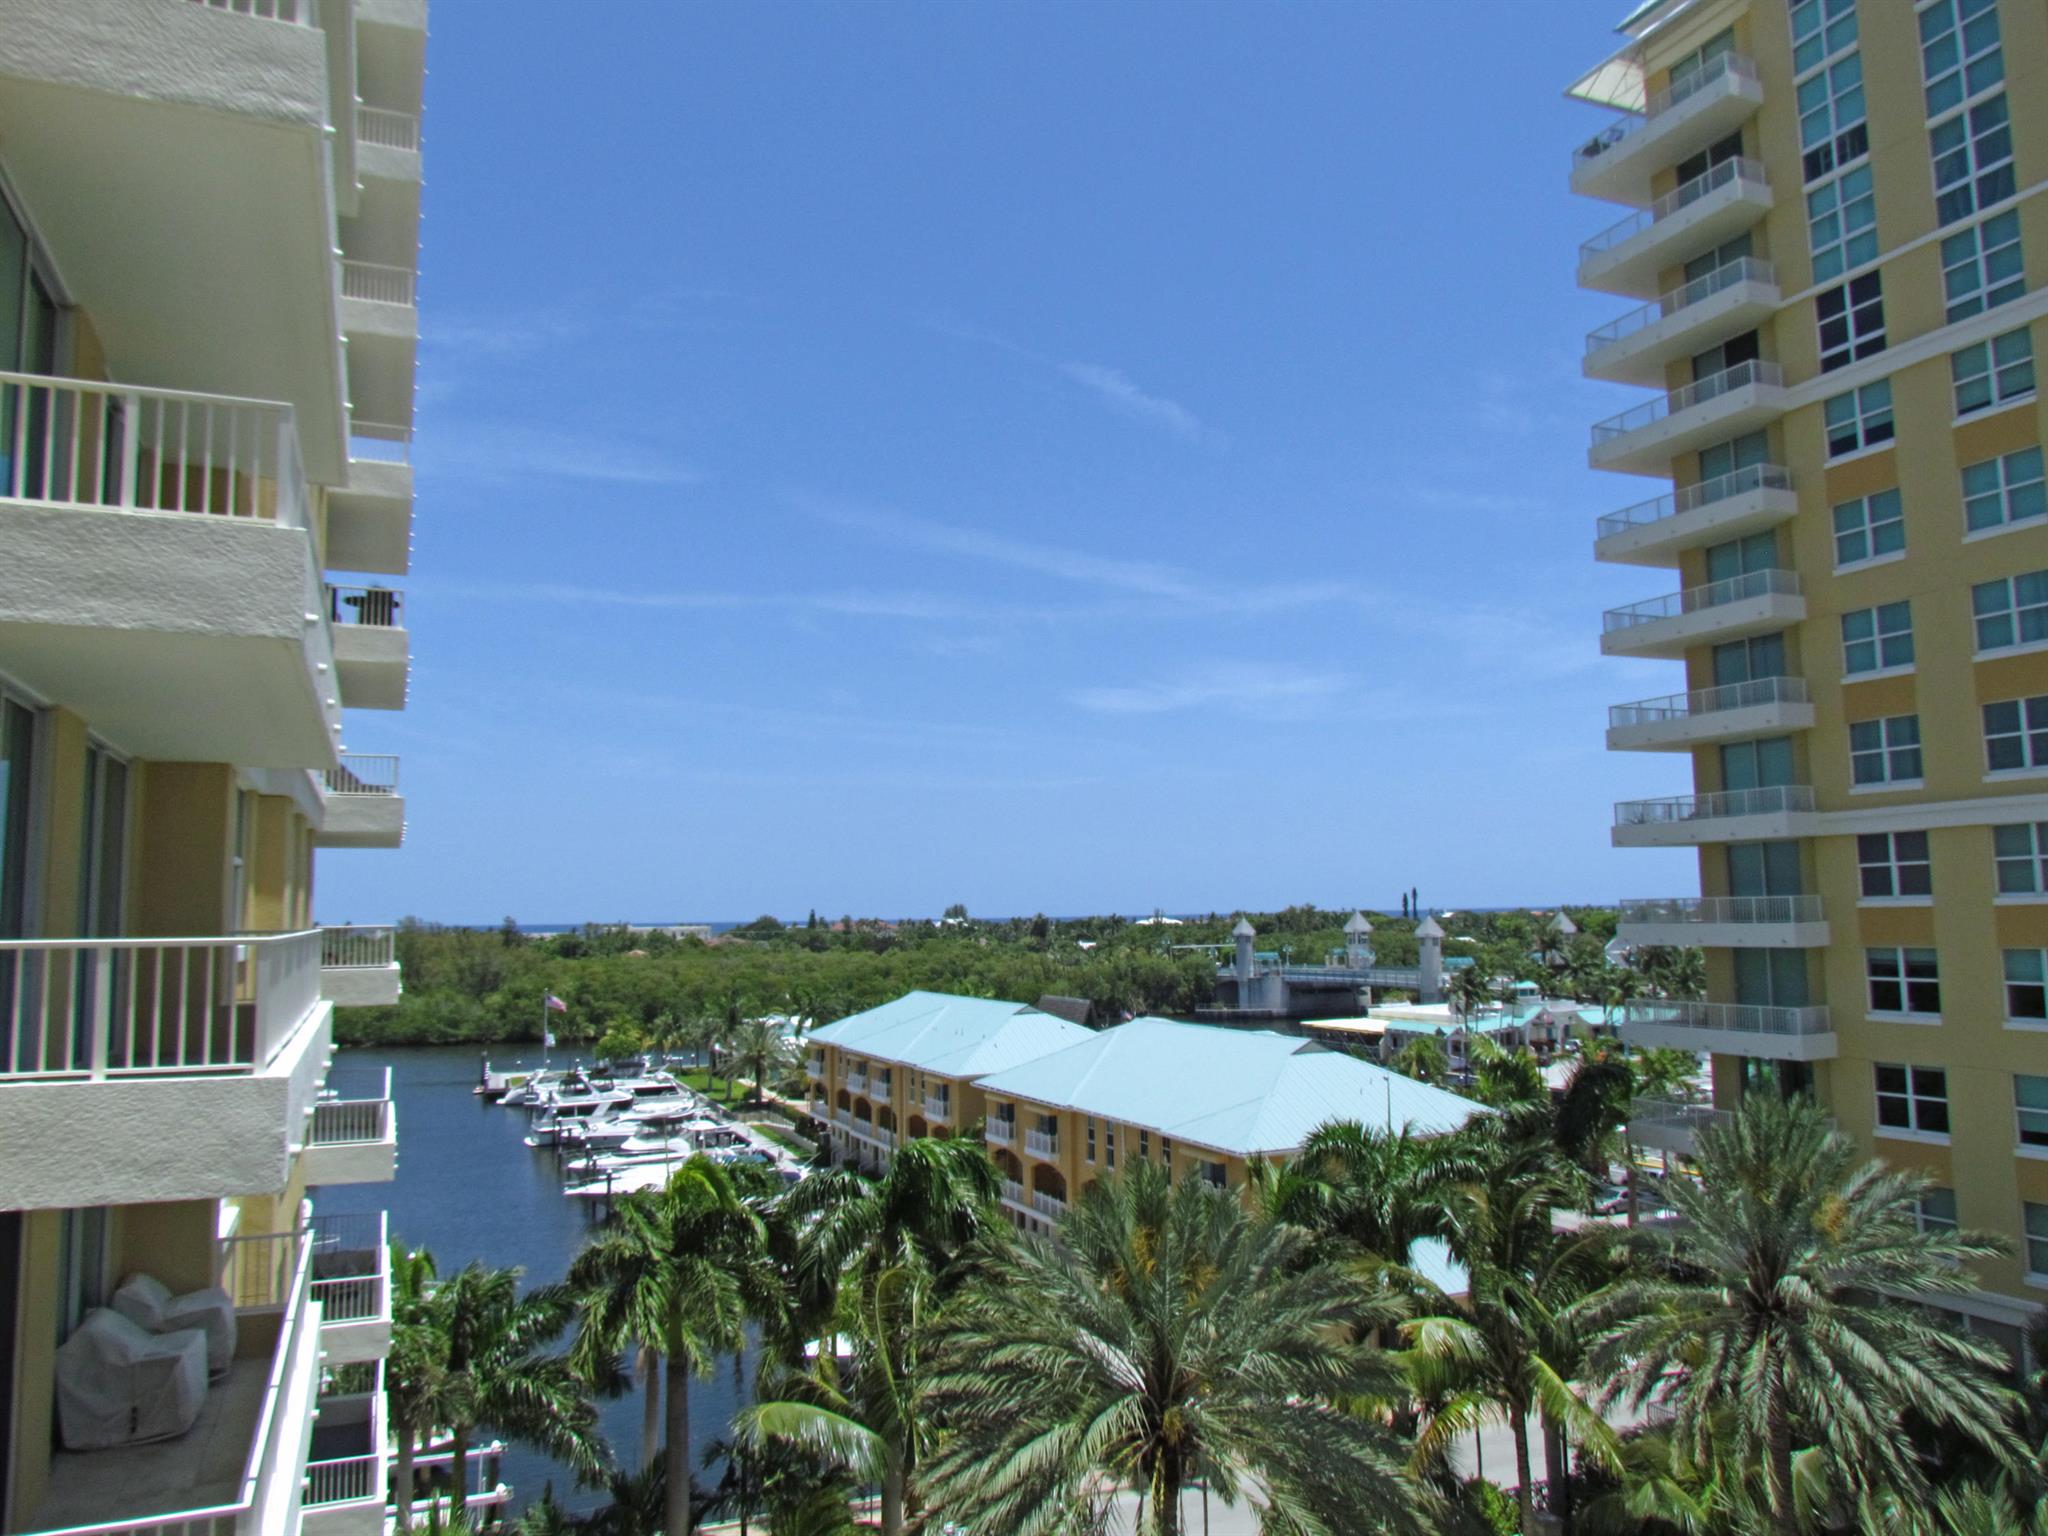 Furnished/Turnkey Two month Rental for the months of May & June 2024. Perfectly Maintained Intracoastal, Marina, Preserve & Ocean View Condo. 2/2 Split Master Bedroom Layout. Secured Covered Parking Garage. 24hr Door/Security Person. Resort Style Pool Area. Fitness Center. 1/2 mile walk to Beach. Surrounded by Restaurants. 5 Miles to World Famous Atlantic Avenue.